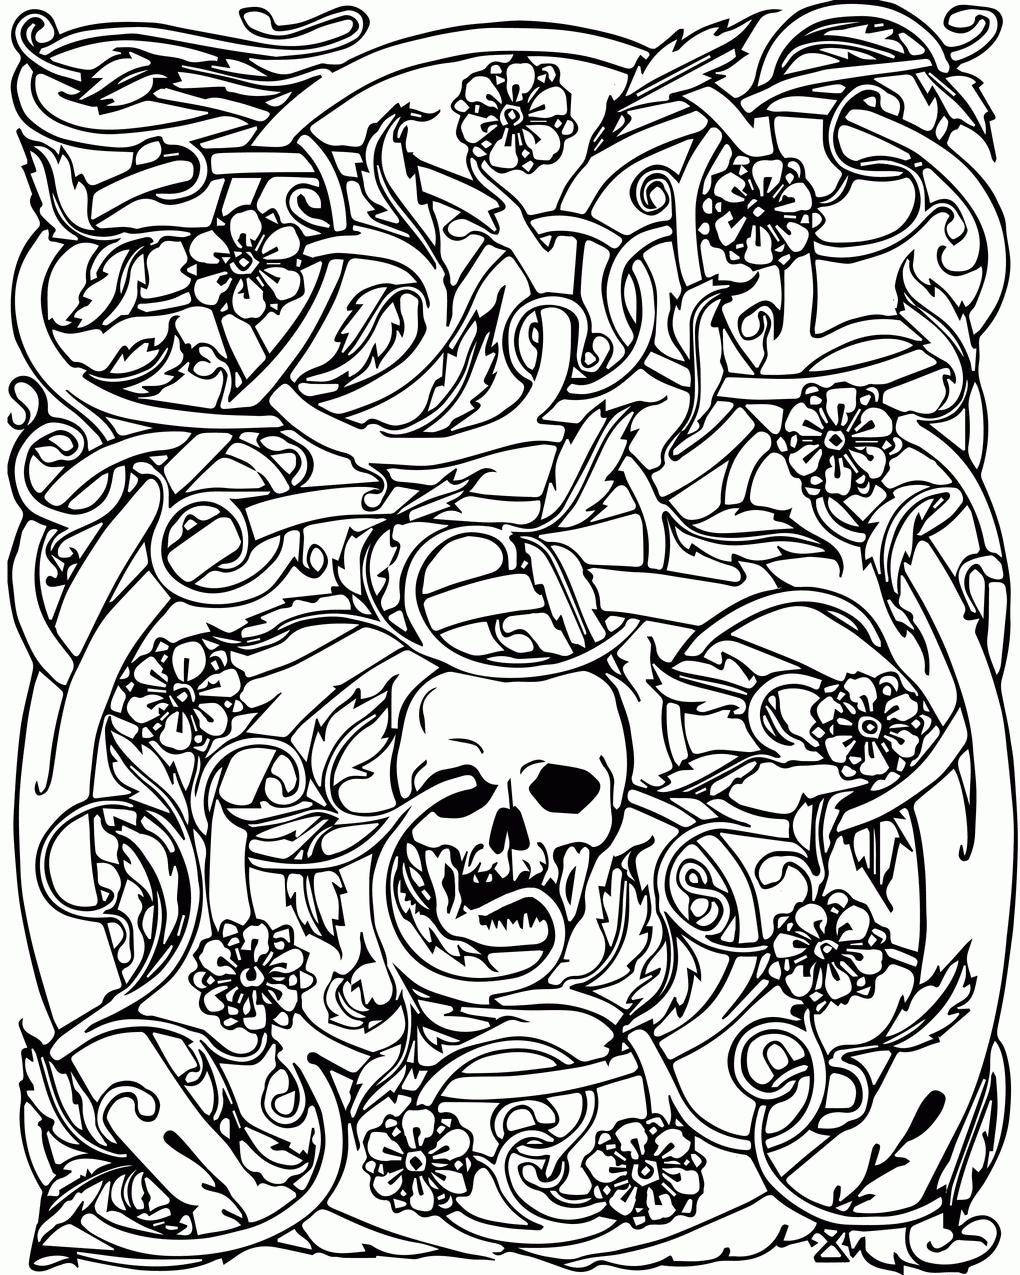 Halloween Coloring Pages For Adults Printable Free   High ...